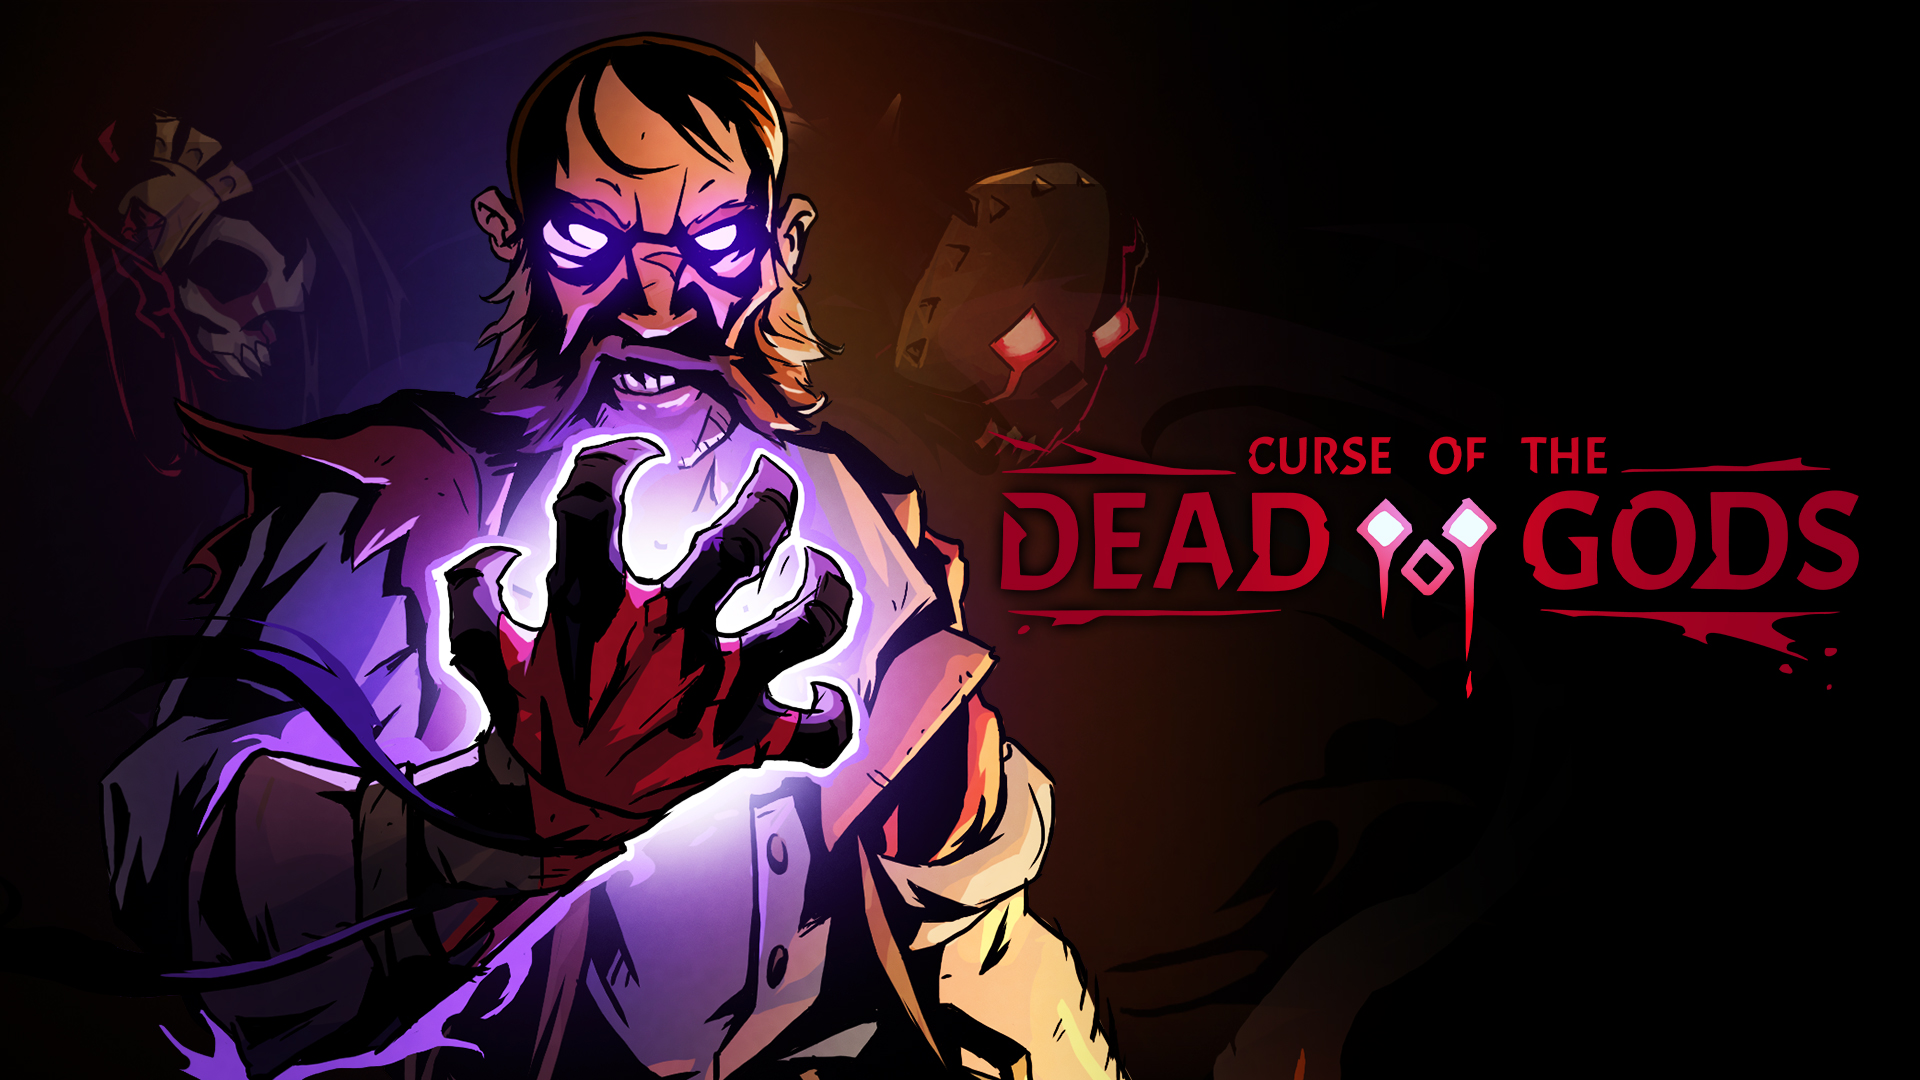 'Curse of the Dead Gods' is an addictive hack-and-slash roguelite